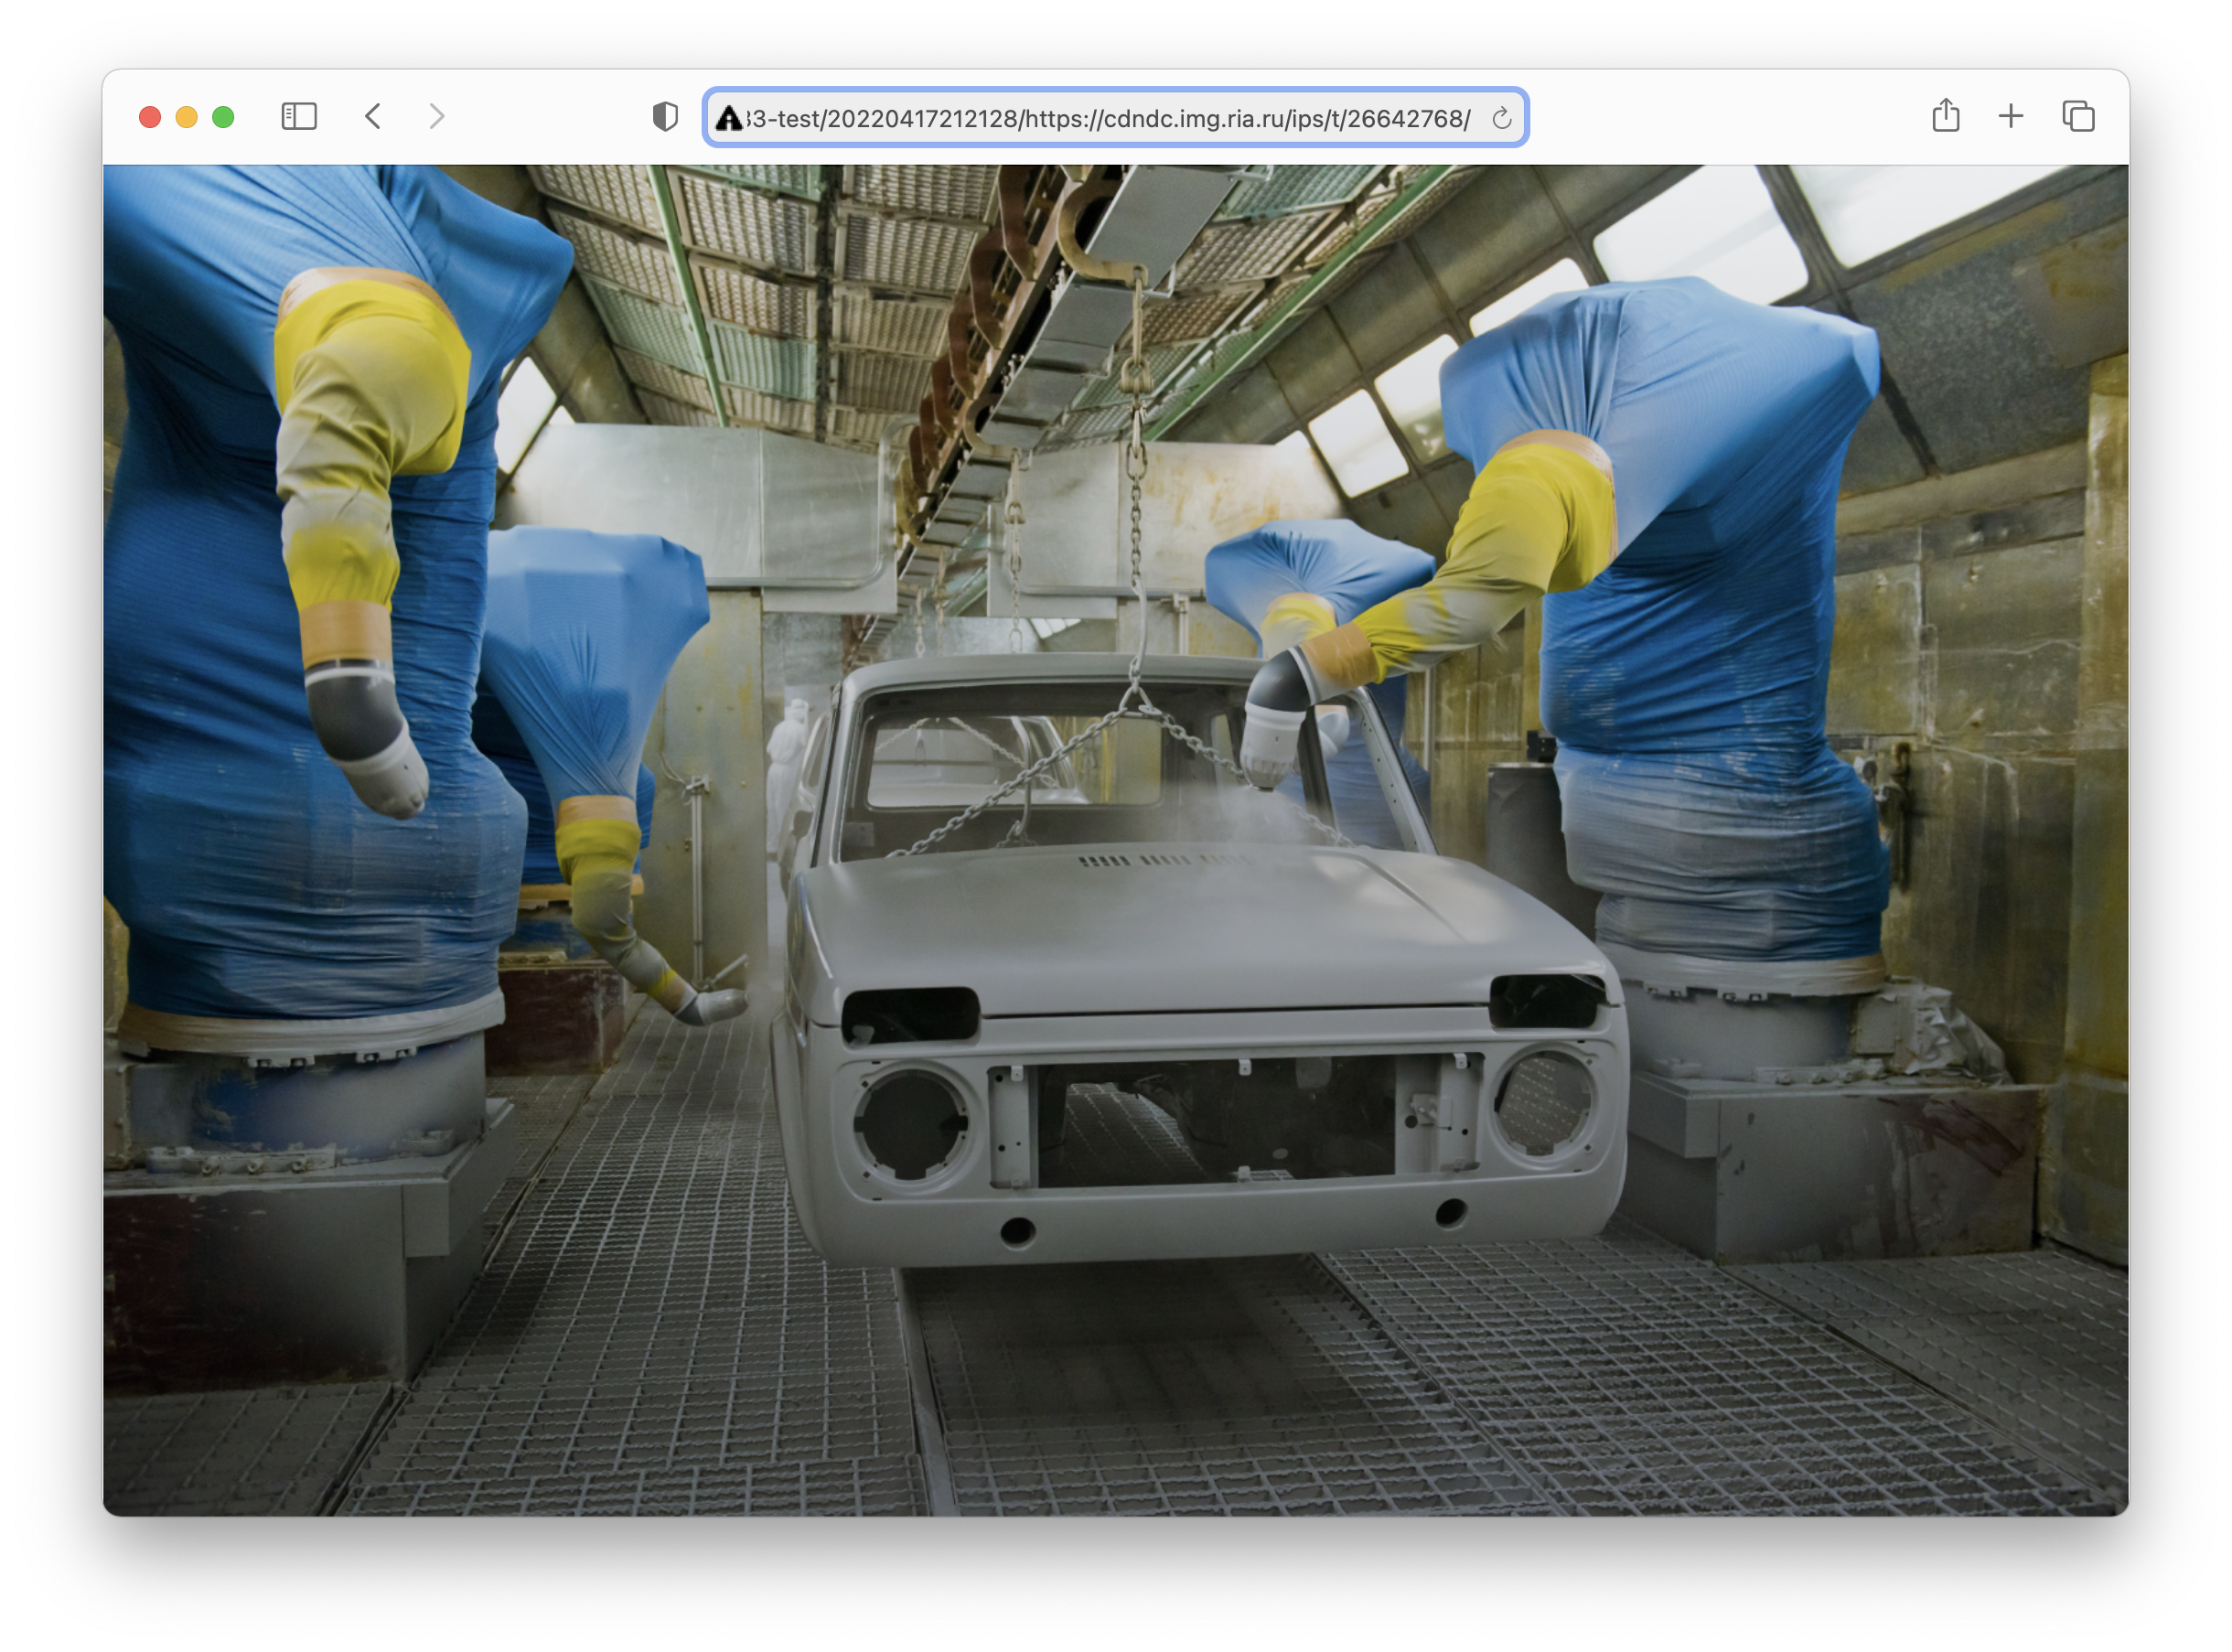 Photograph of robots wrapped in Ukrainian flags painting a Lada car